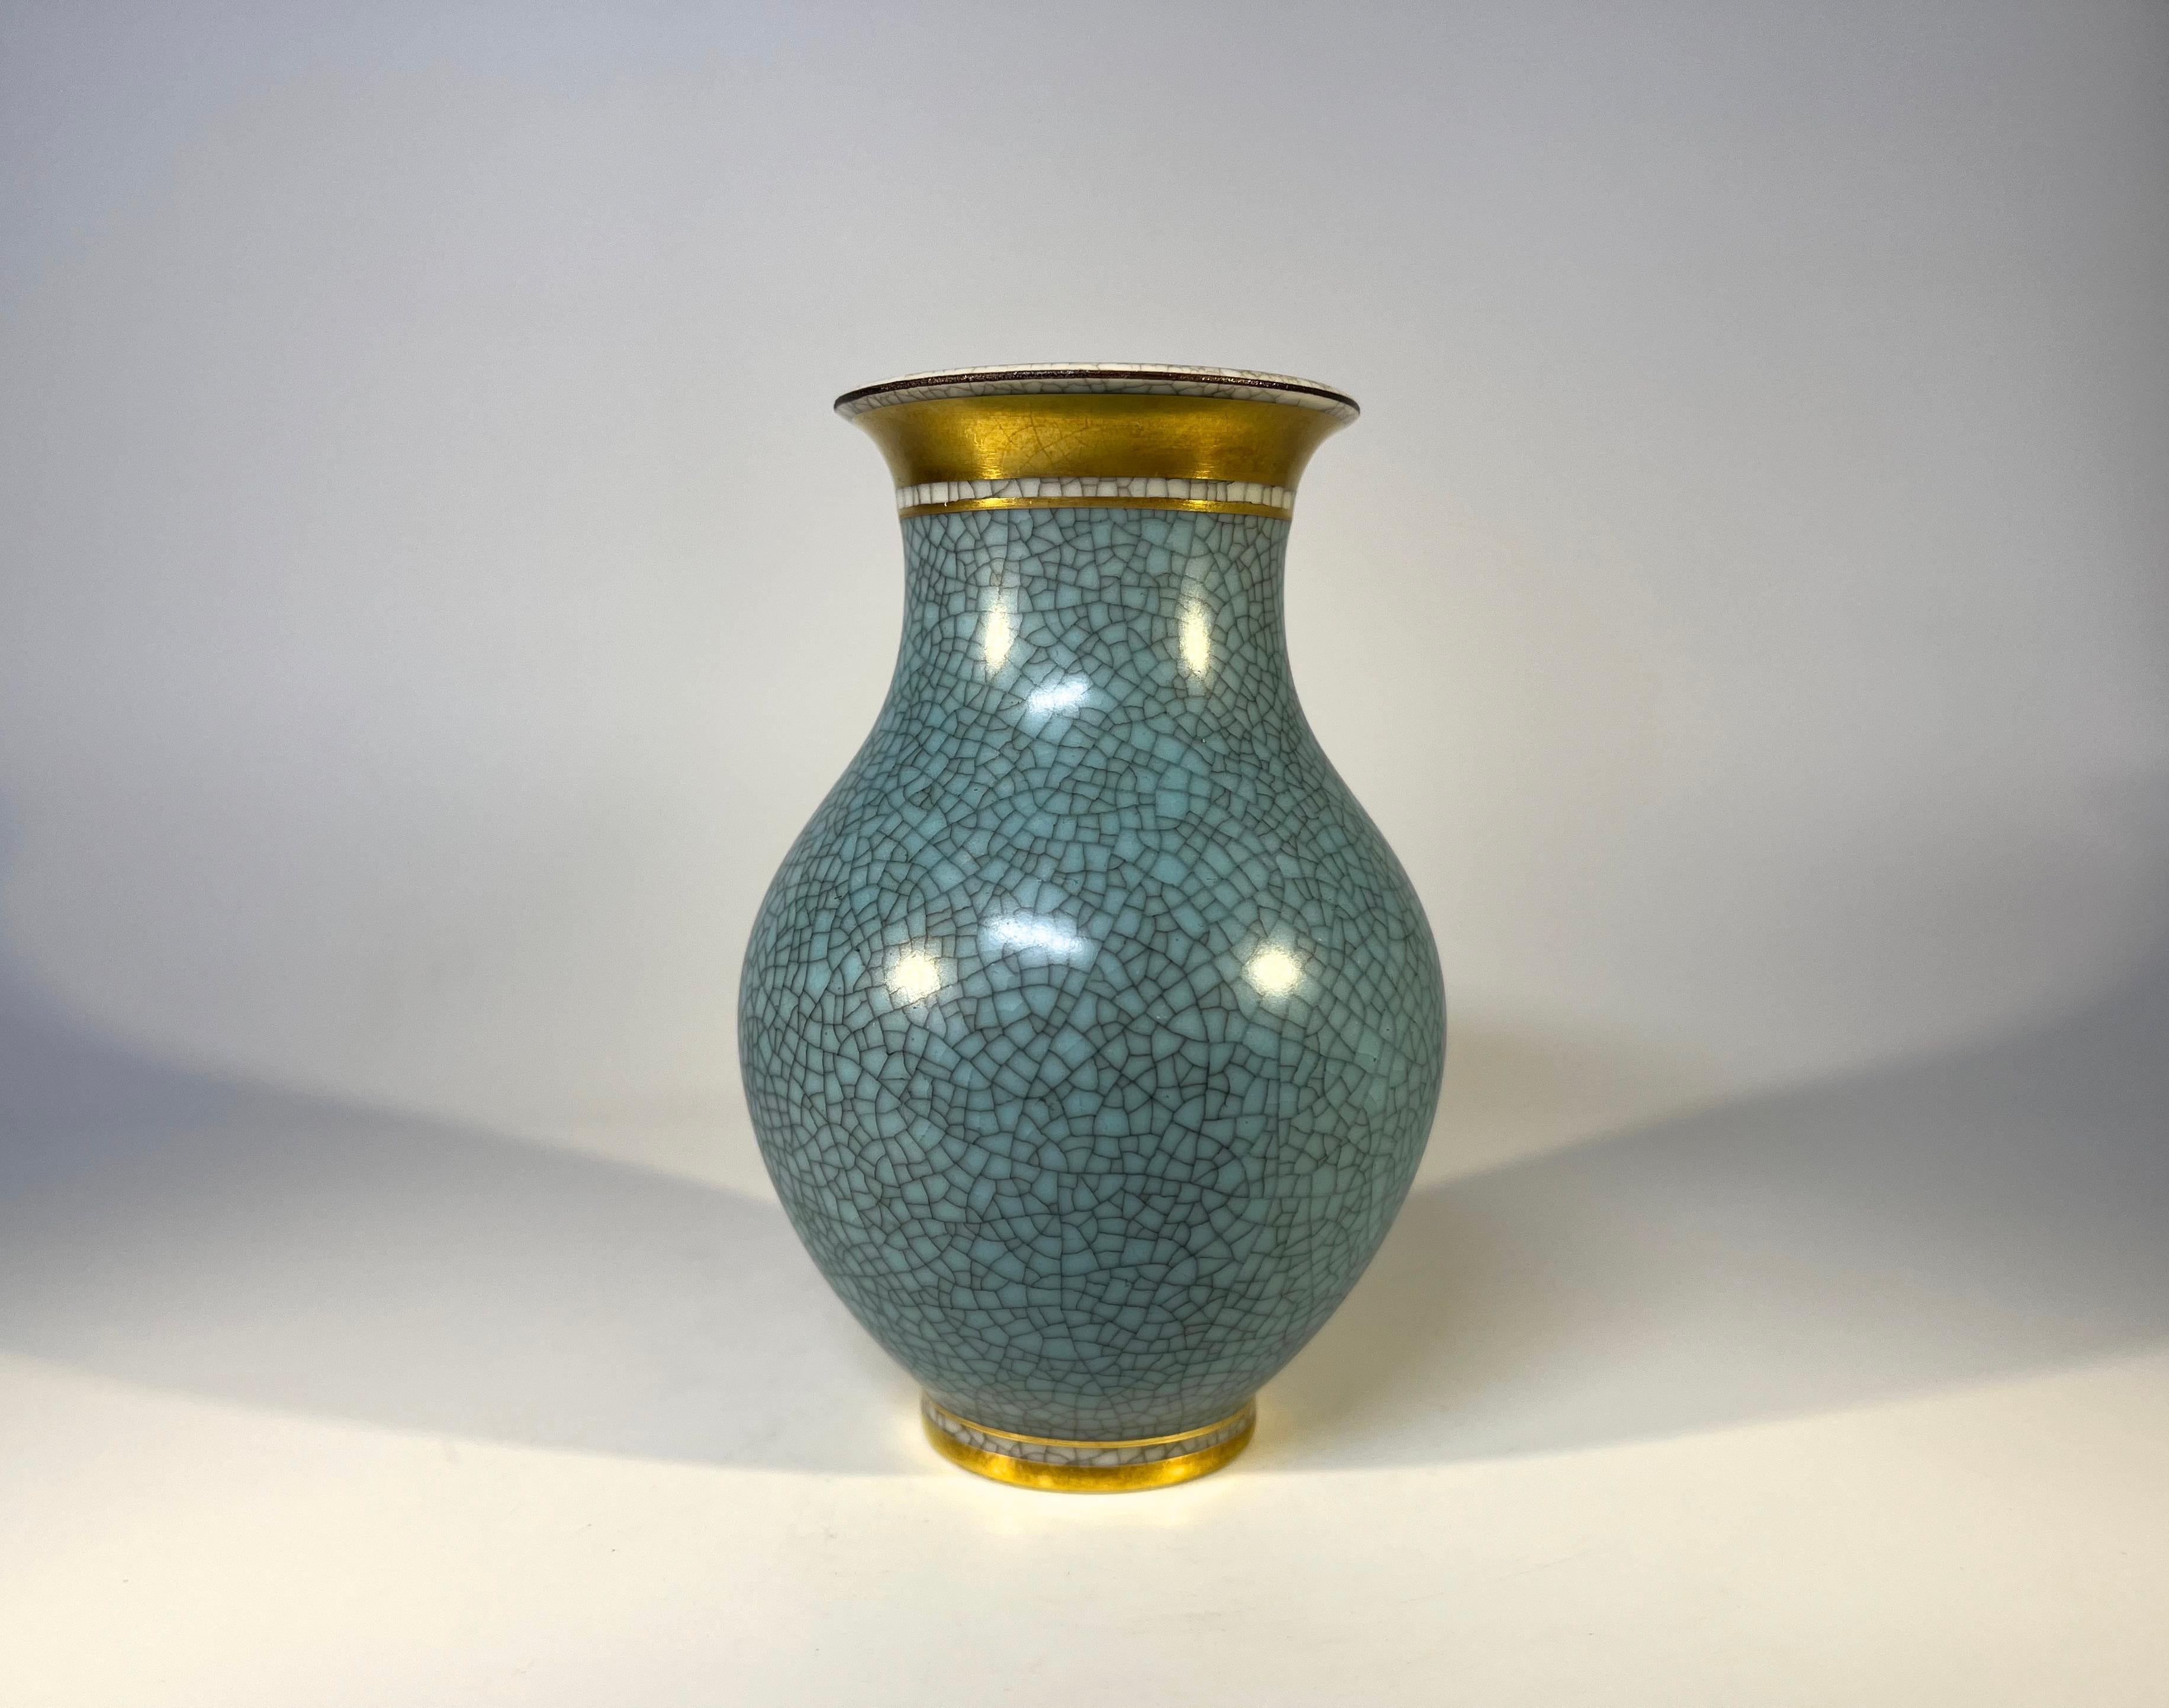 Royal Copenhagen porcelain gilded turquoise and grey crackle glazed petit baluster vase 
A diminutive, quality vase from Royal Copenhagen
Circa 1960's
Stamped and numbered 2736
Height 4.5 inch, Diameter 3 inch
Very good condition. 
Wear consistent